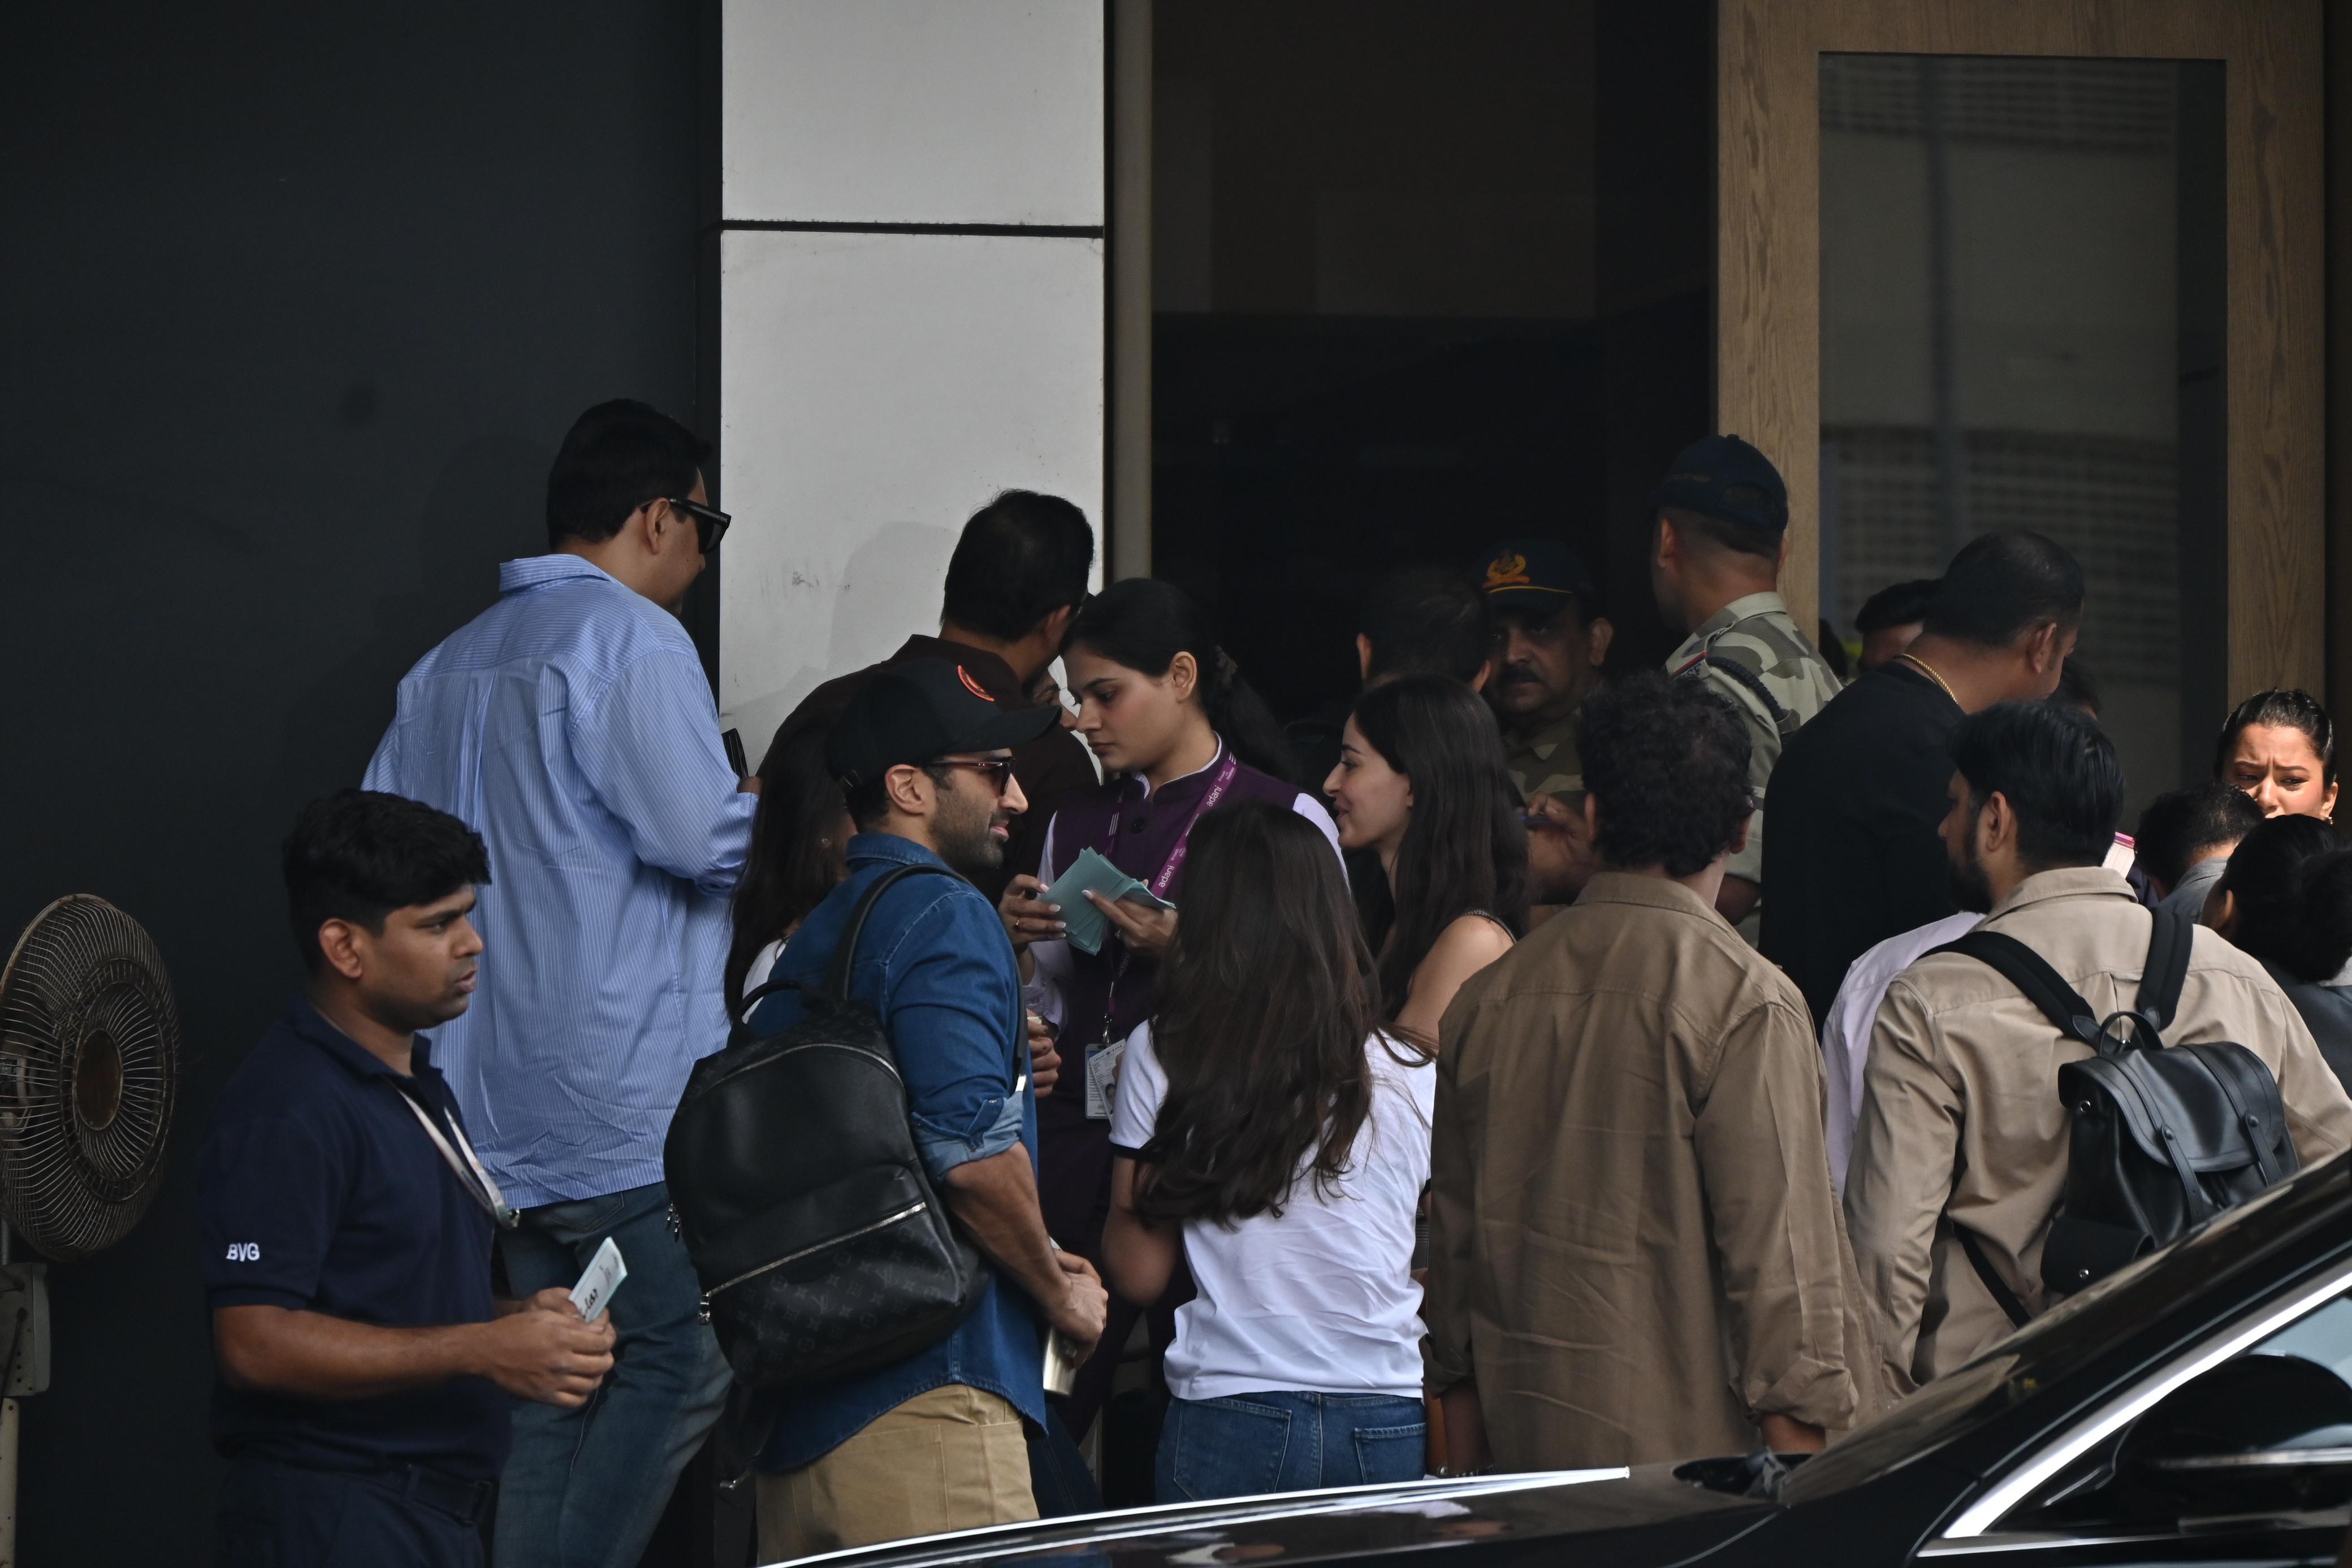 However, fans were in for a treat as they spotted alleged former lovers Aditya and Shraddha Kapoor captured together in a frame.